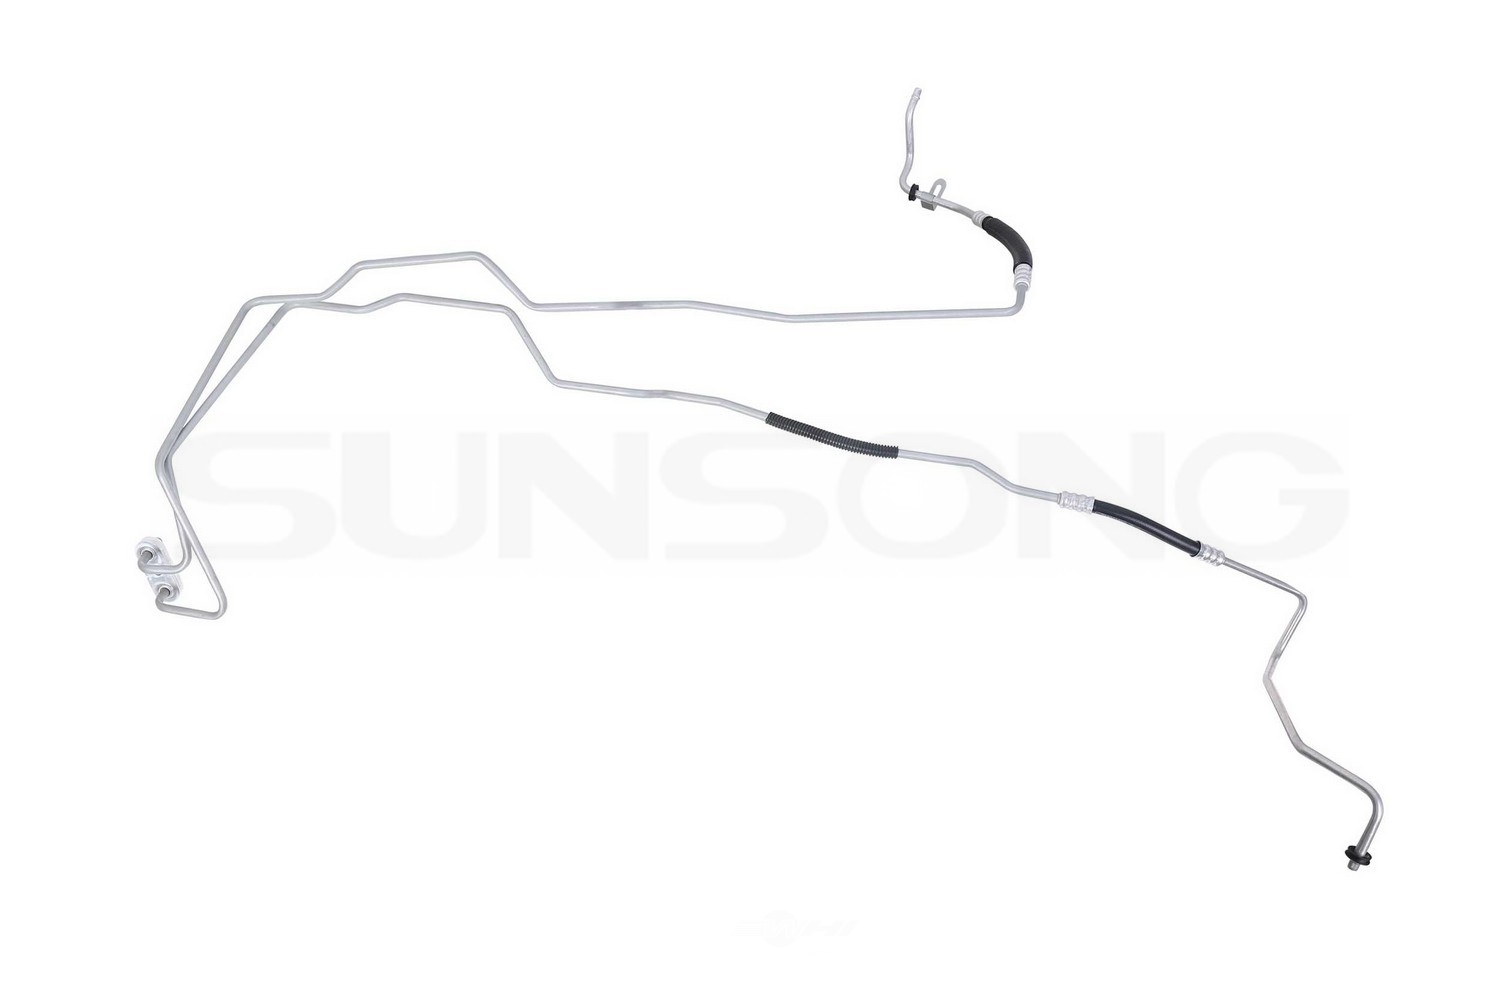 SUNSONG NORTH AMERICA - Auto Trans Oil Cooler Hose Assembly (Inlet and Outlet) - SUG 5801141